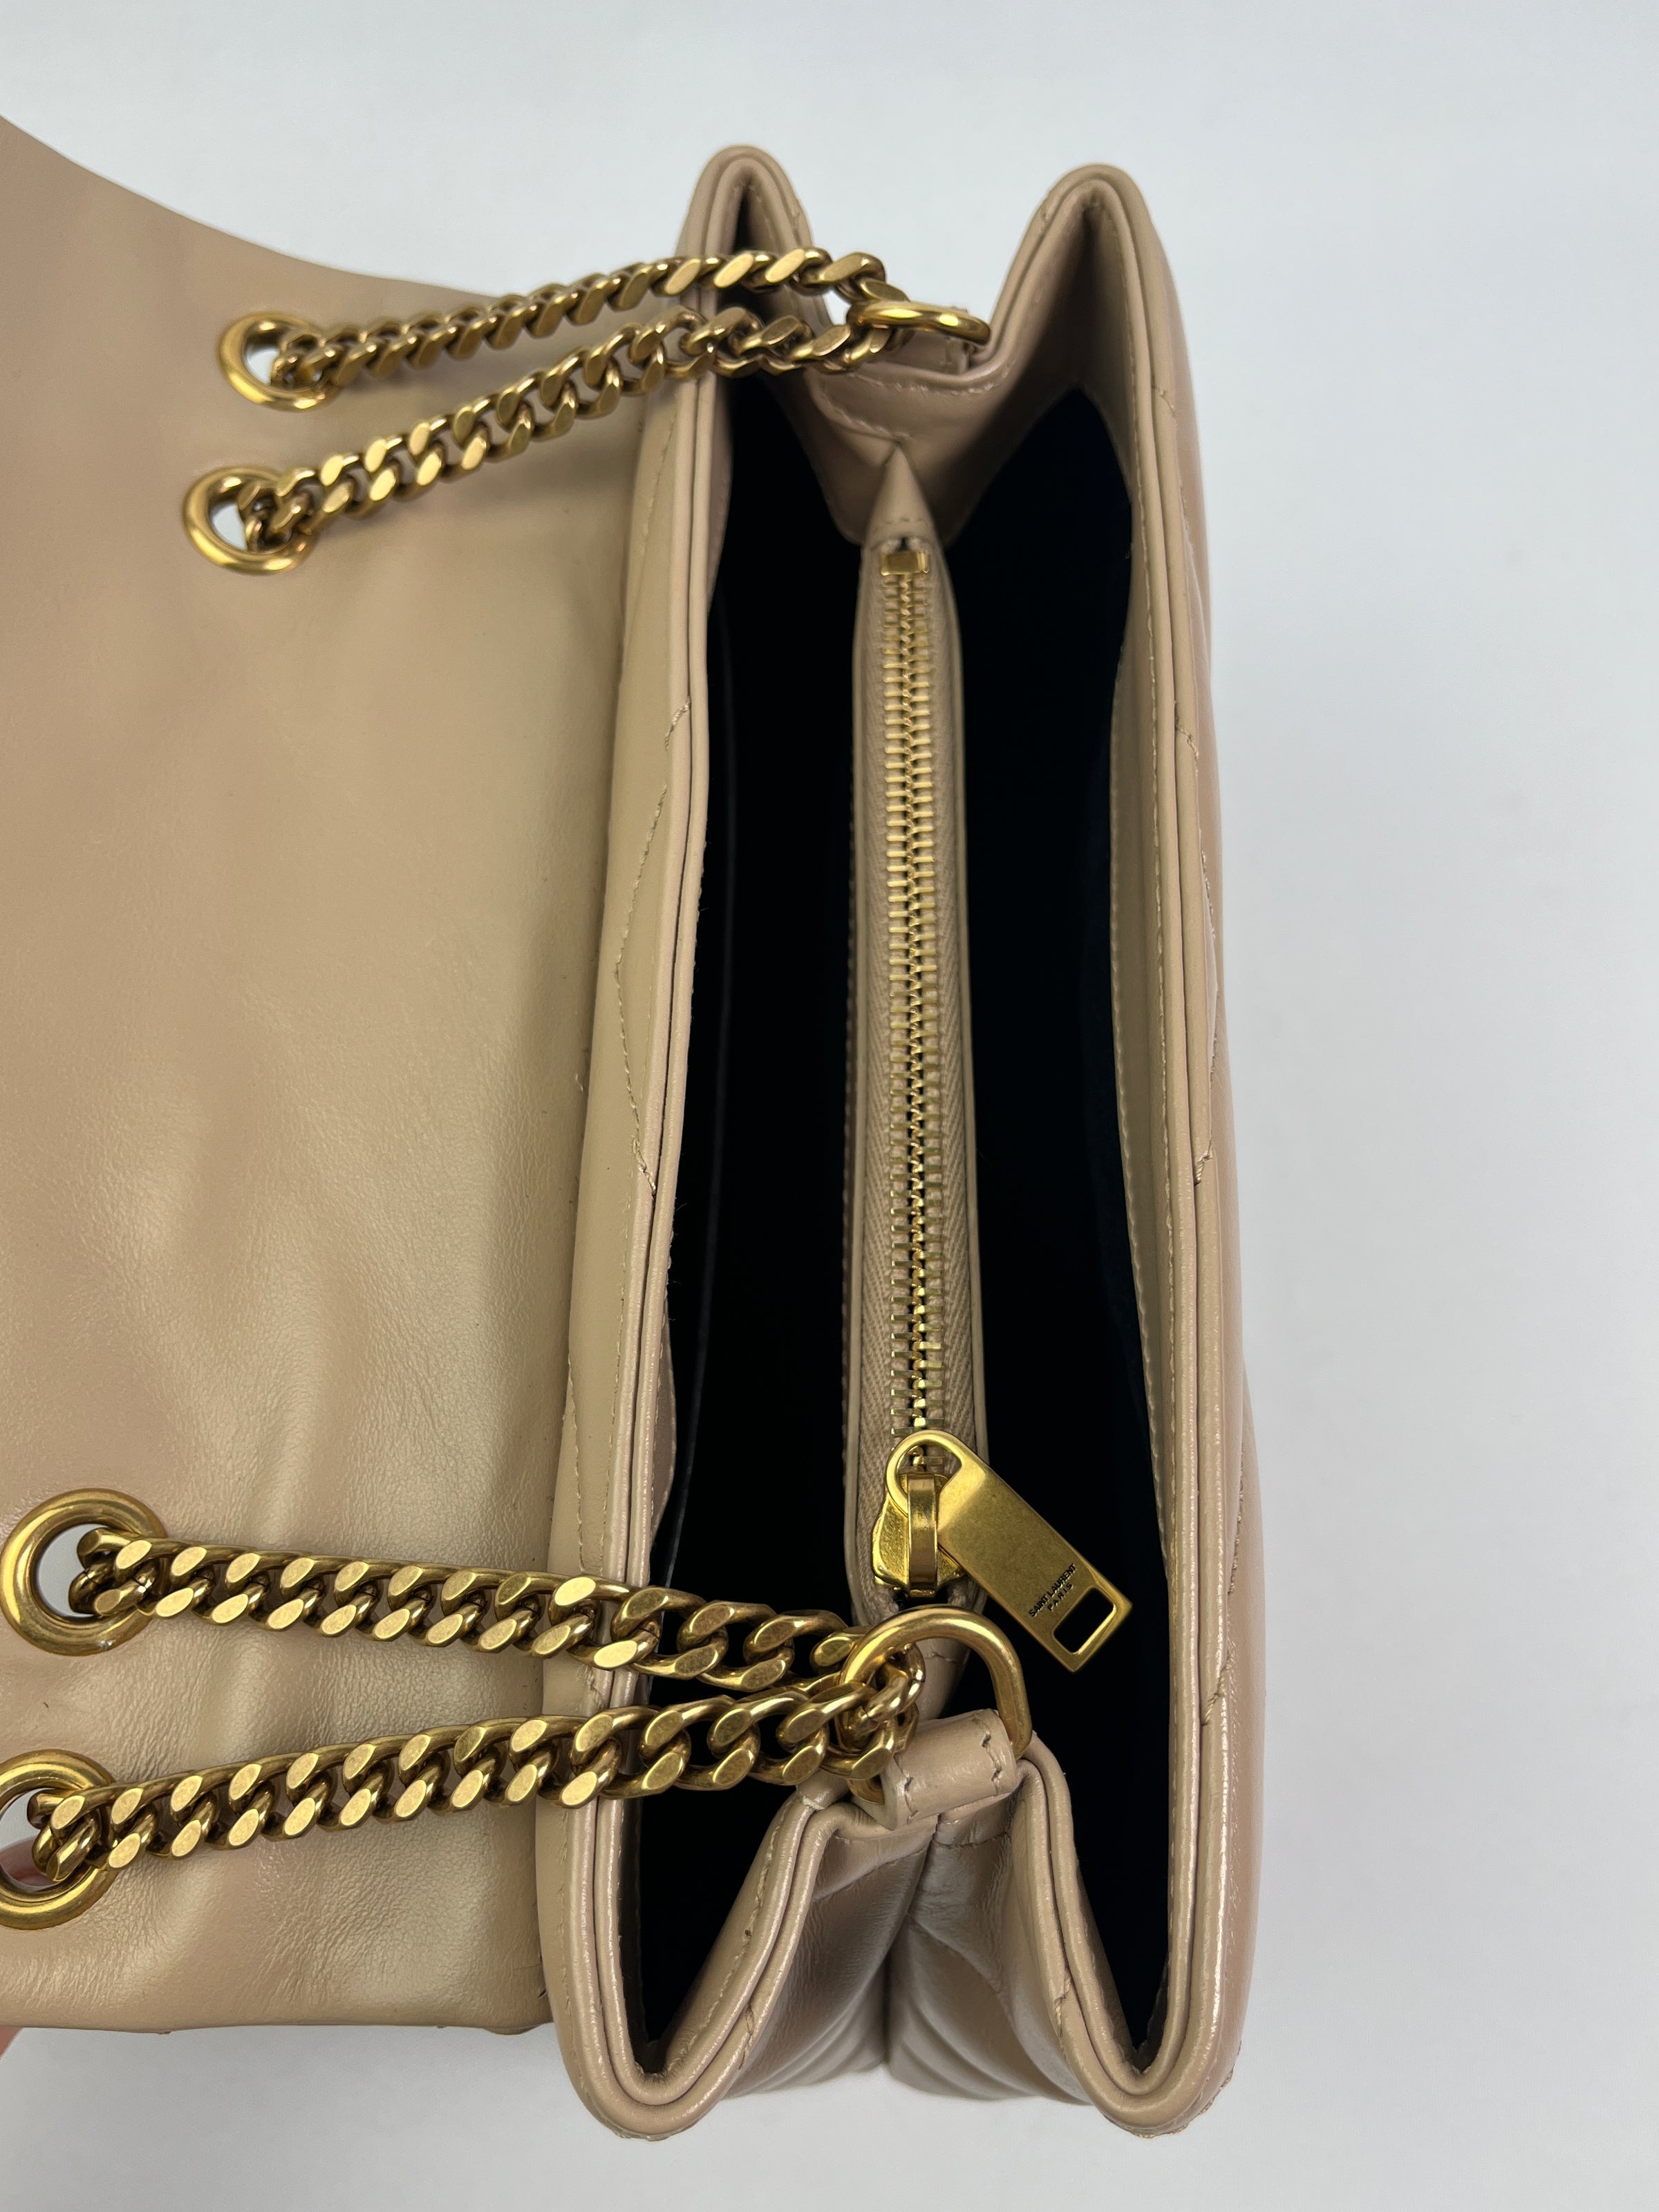 Is this fendi clutch authentic? The gold snap reads: PK3940